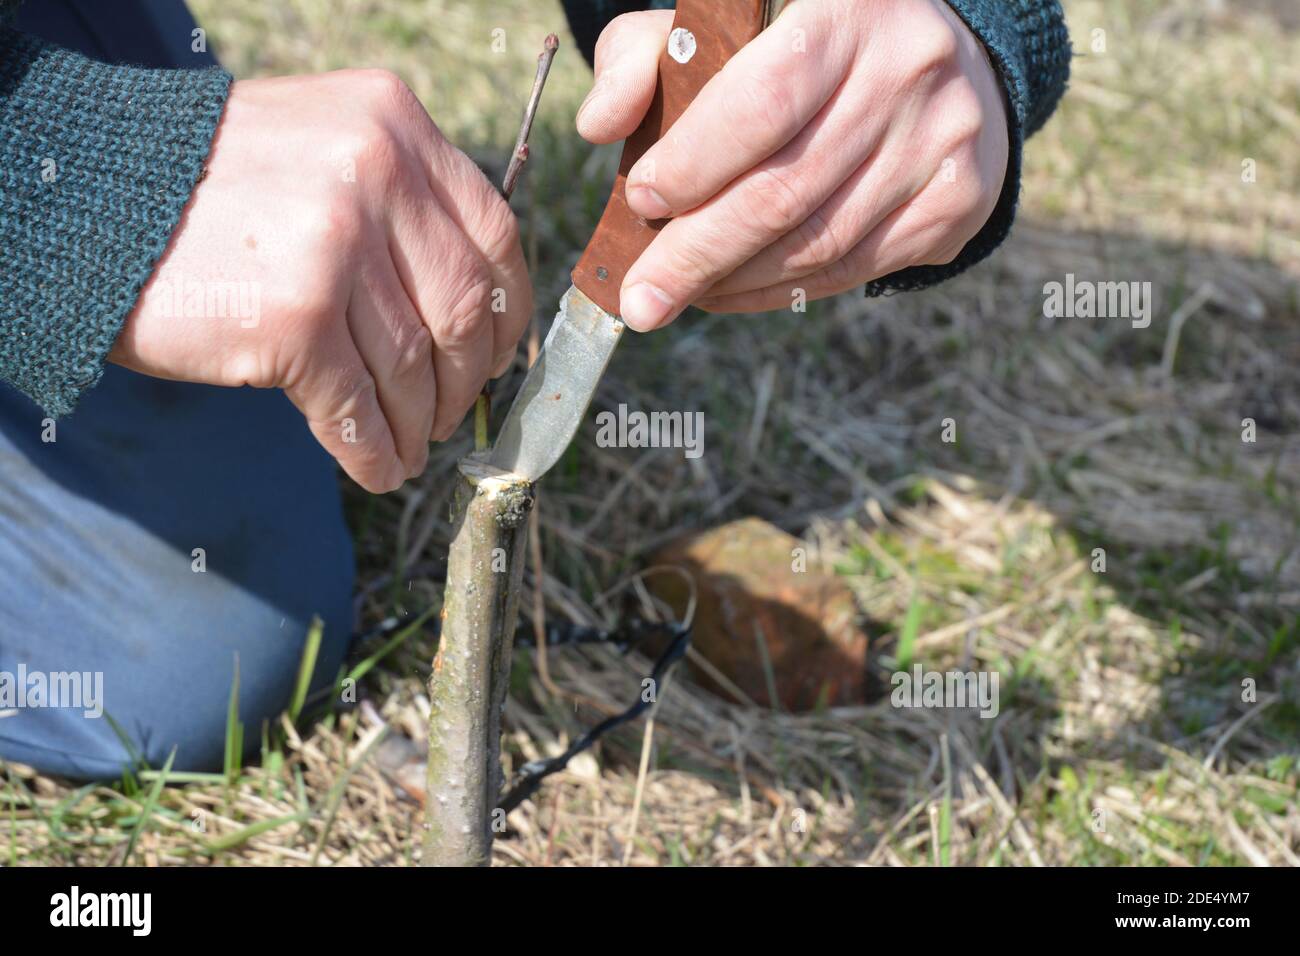 A gardener is grafting and budding a fruit tree. Stock Photo